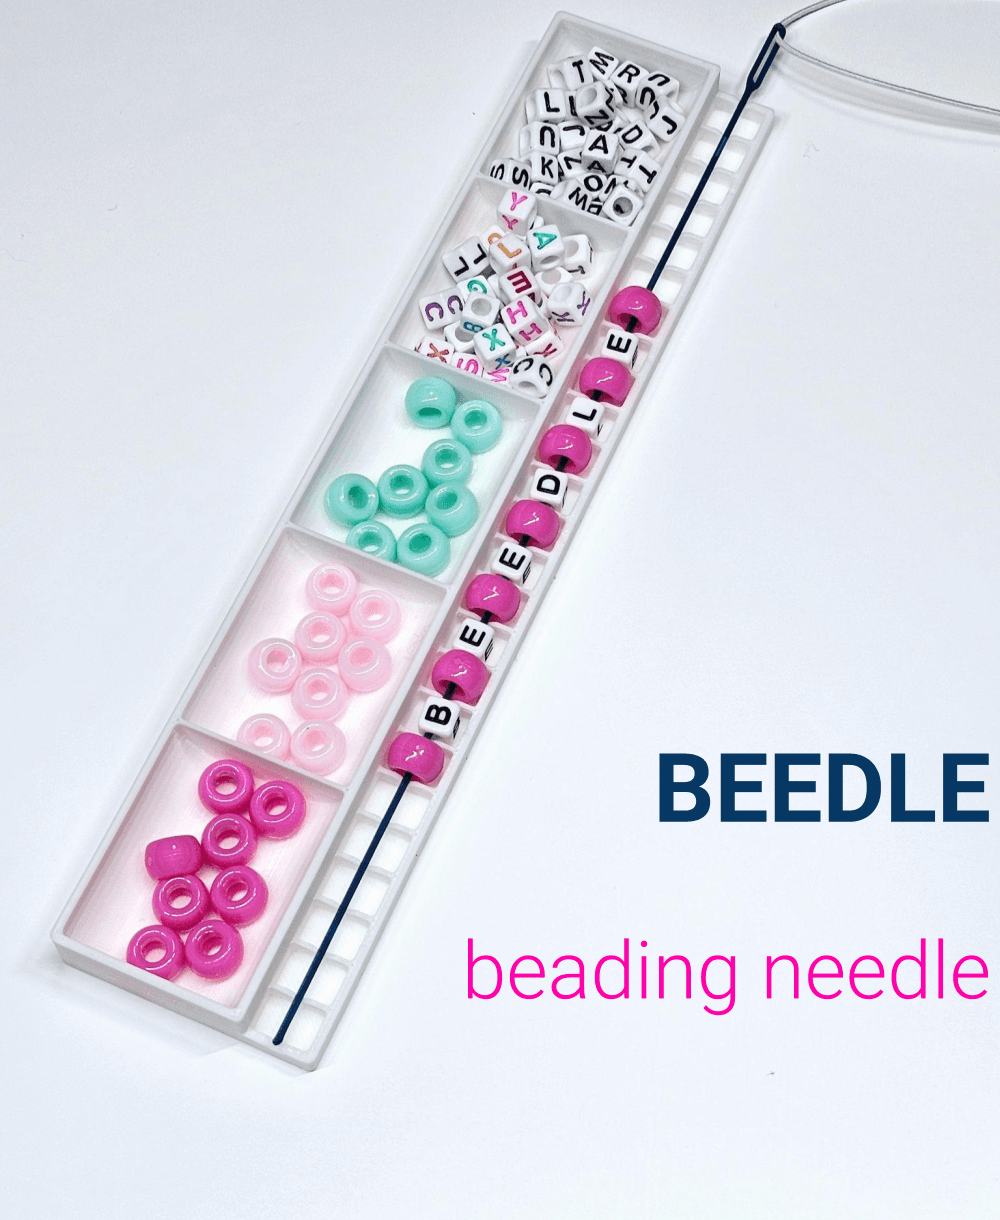 Beedle - The 3D printed beading needle 3d model